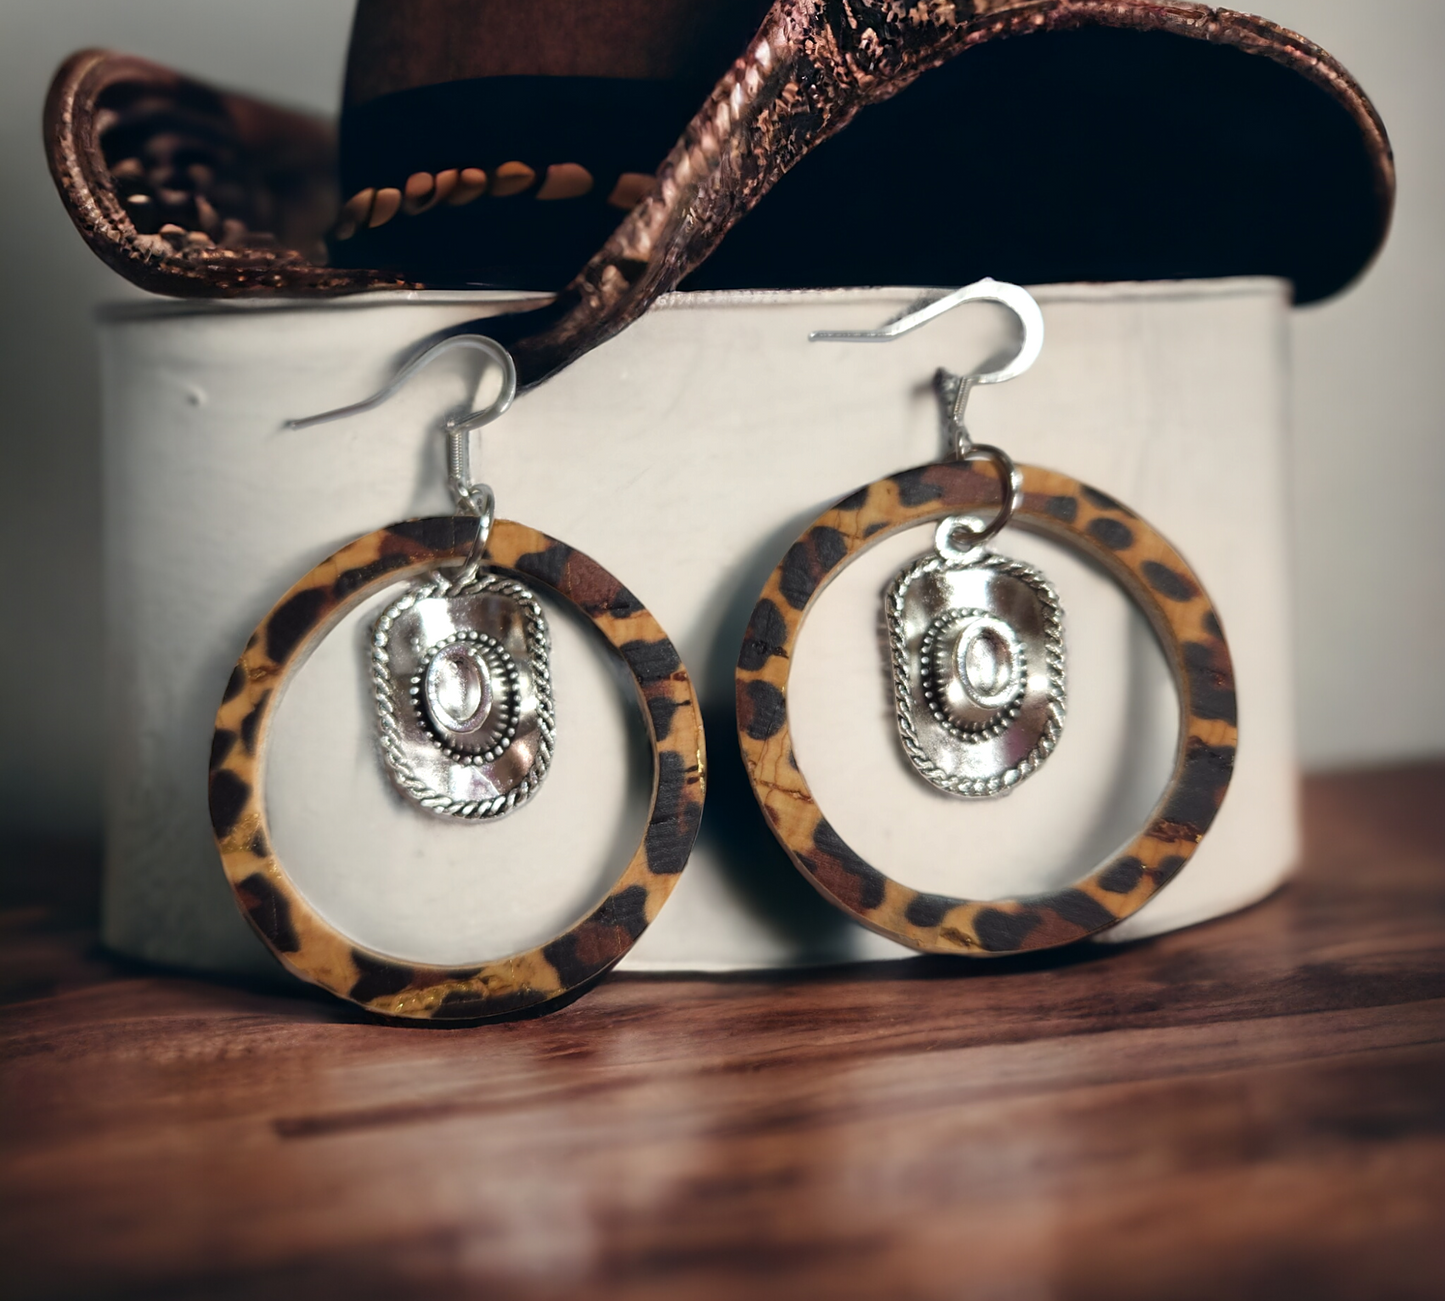 Leopard Circles with Cowboy Hat